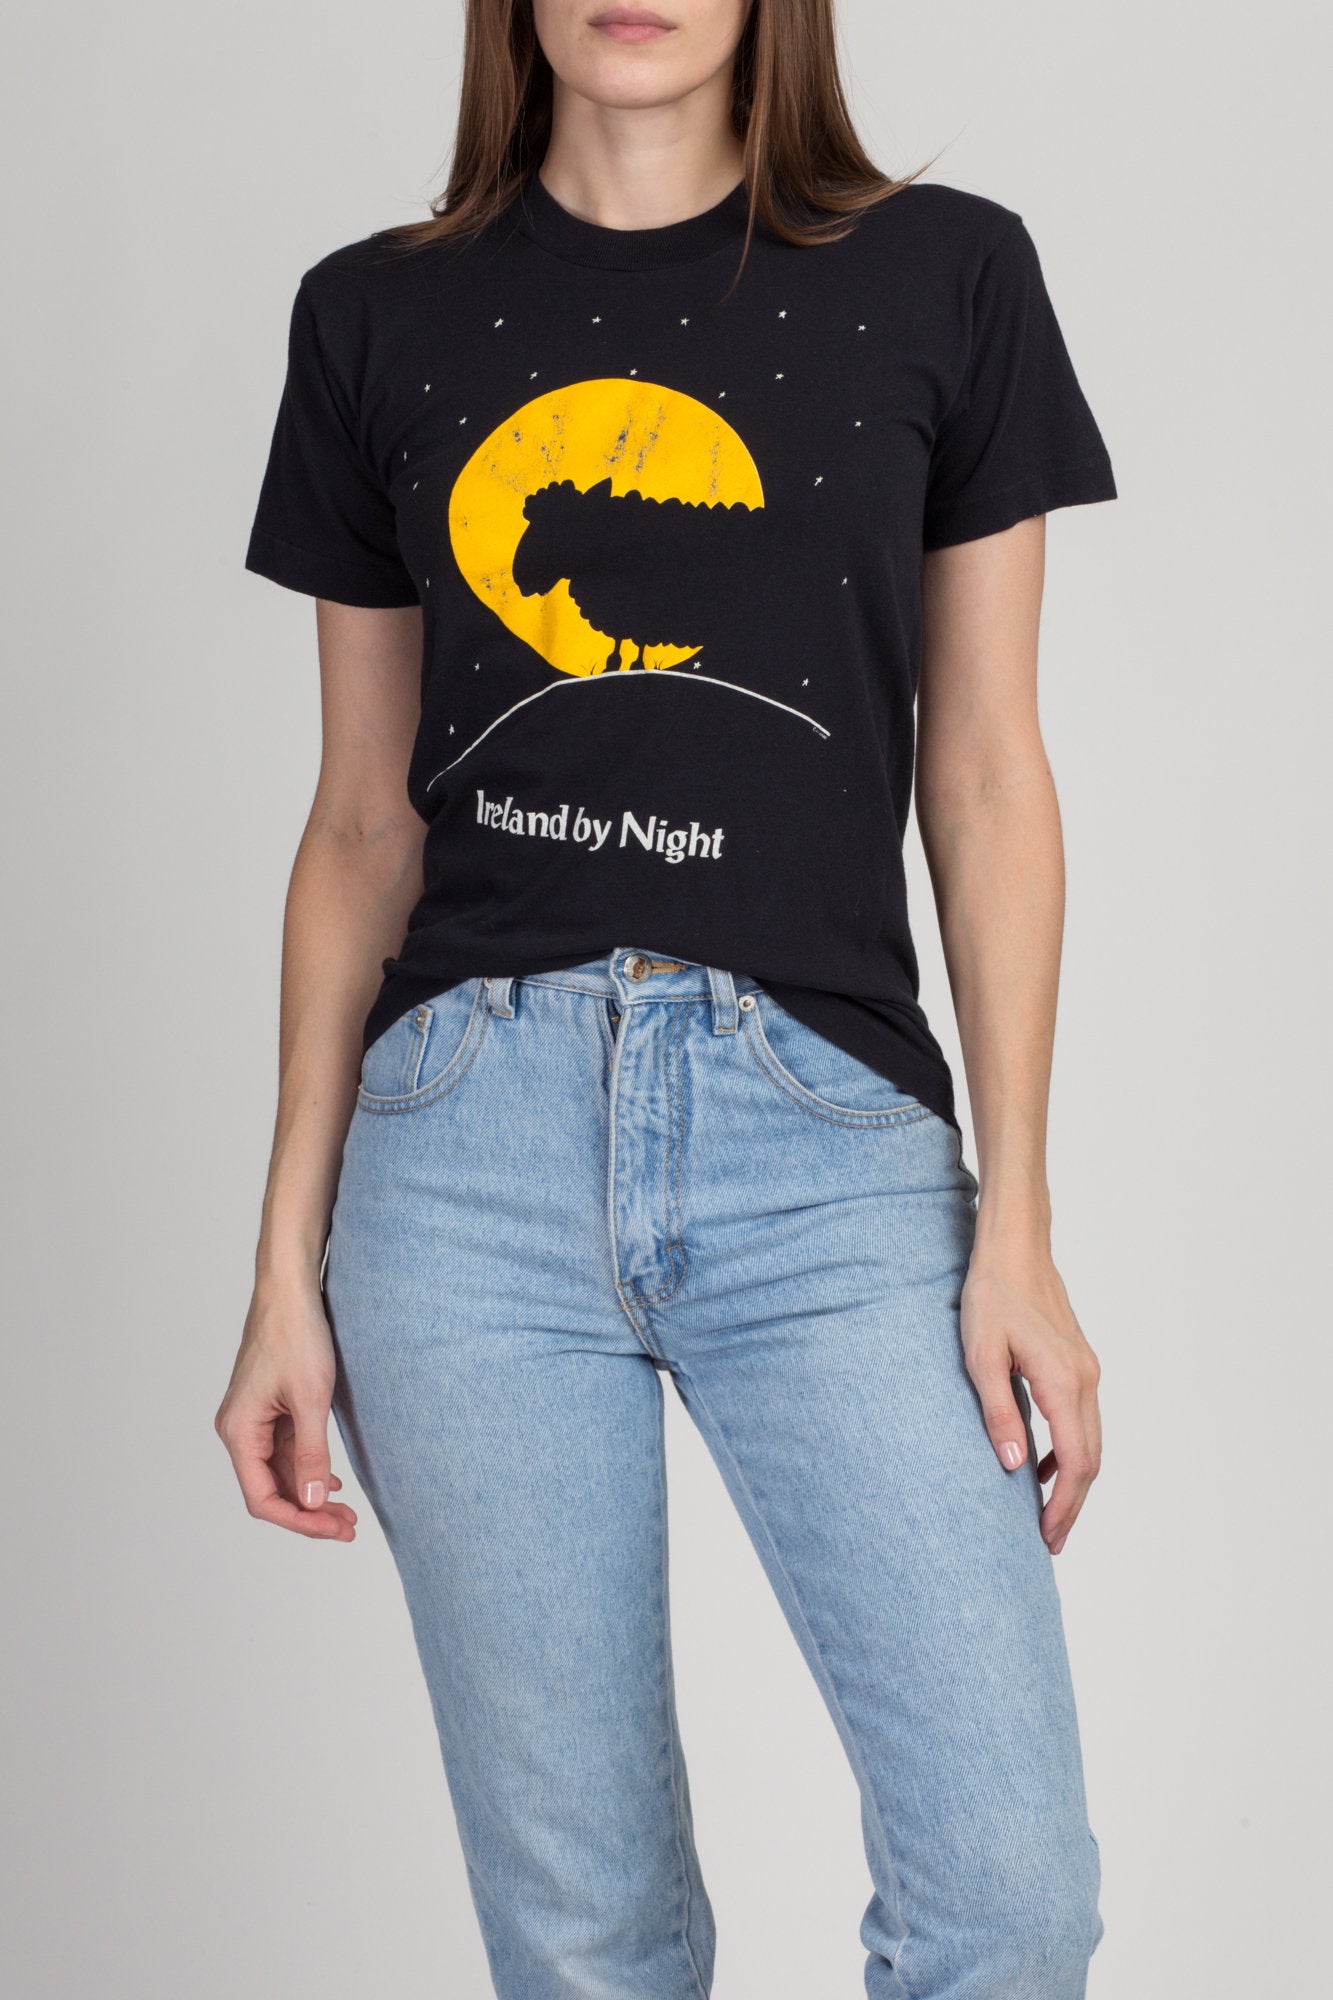 Vintage "Ireland By Night" Sheep Silhouette T Shirt - Small 